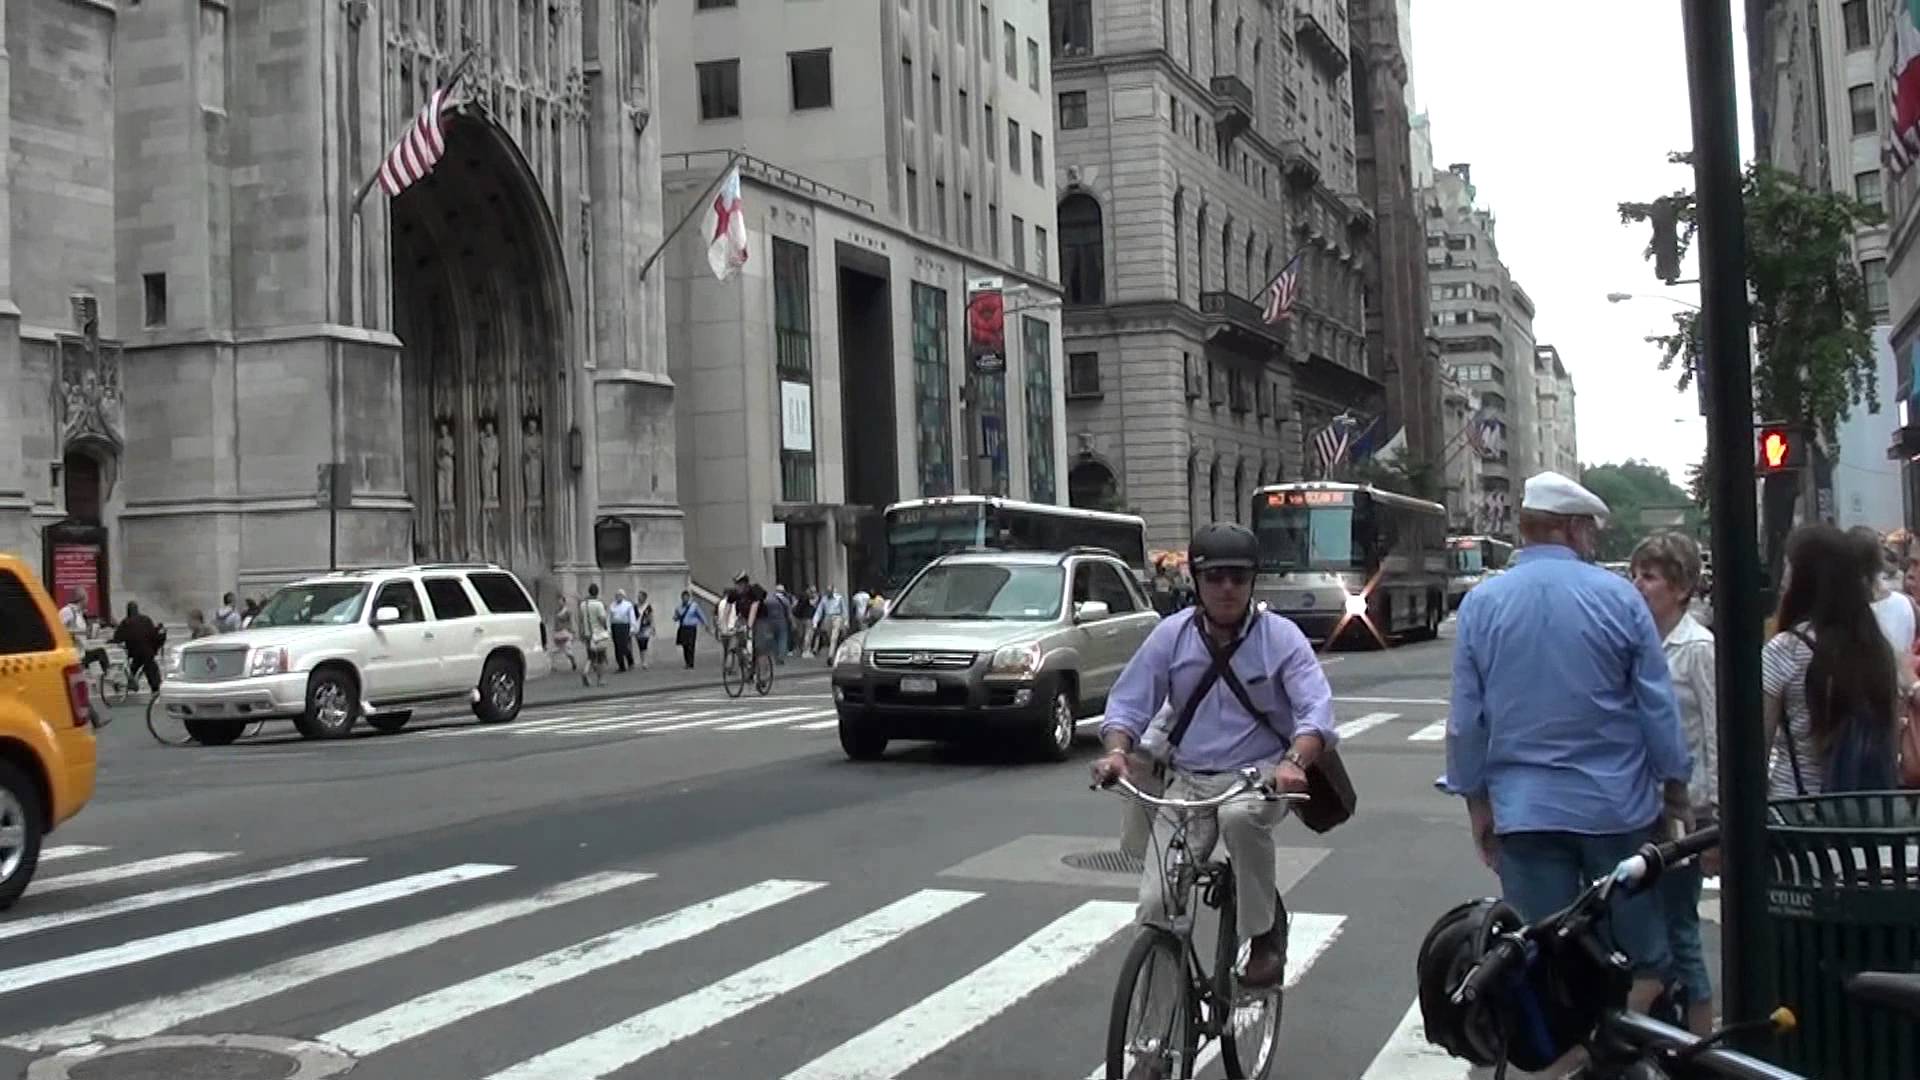 Busy New York Street Traffic 2012 Video Footage - YouTube